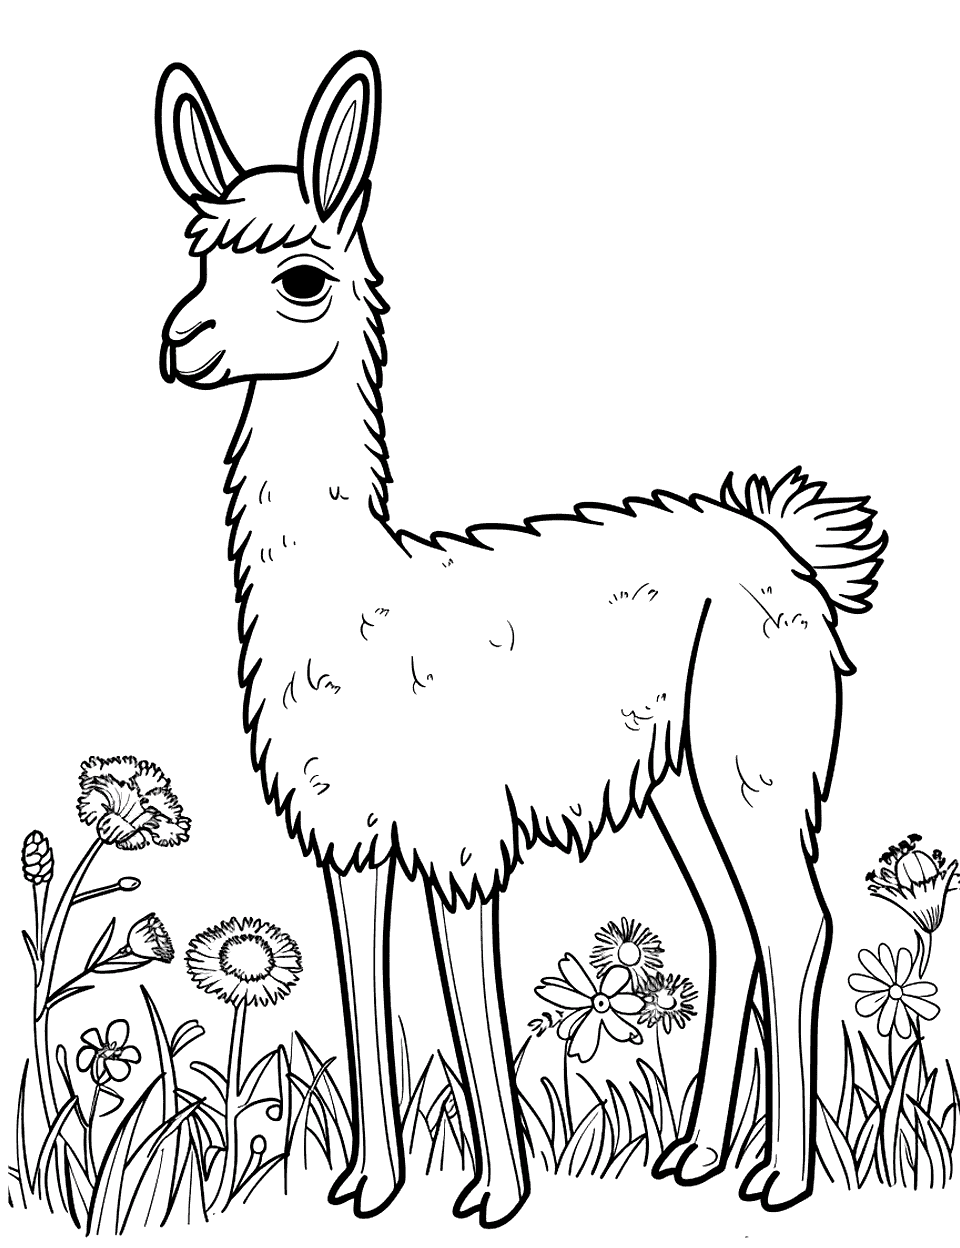 Baby Llama in a Field Coloring Page - A cute baby llama standing in a grassy field with flowers.